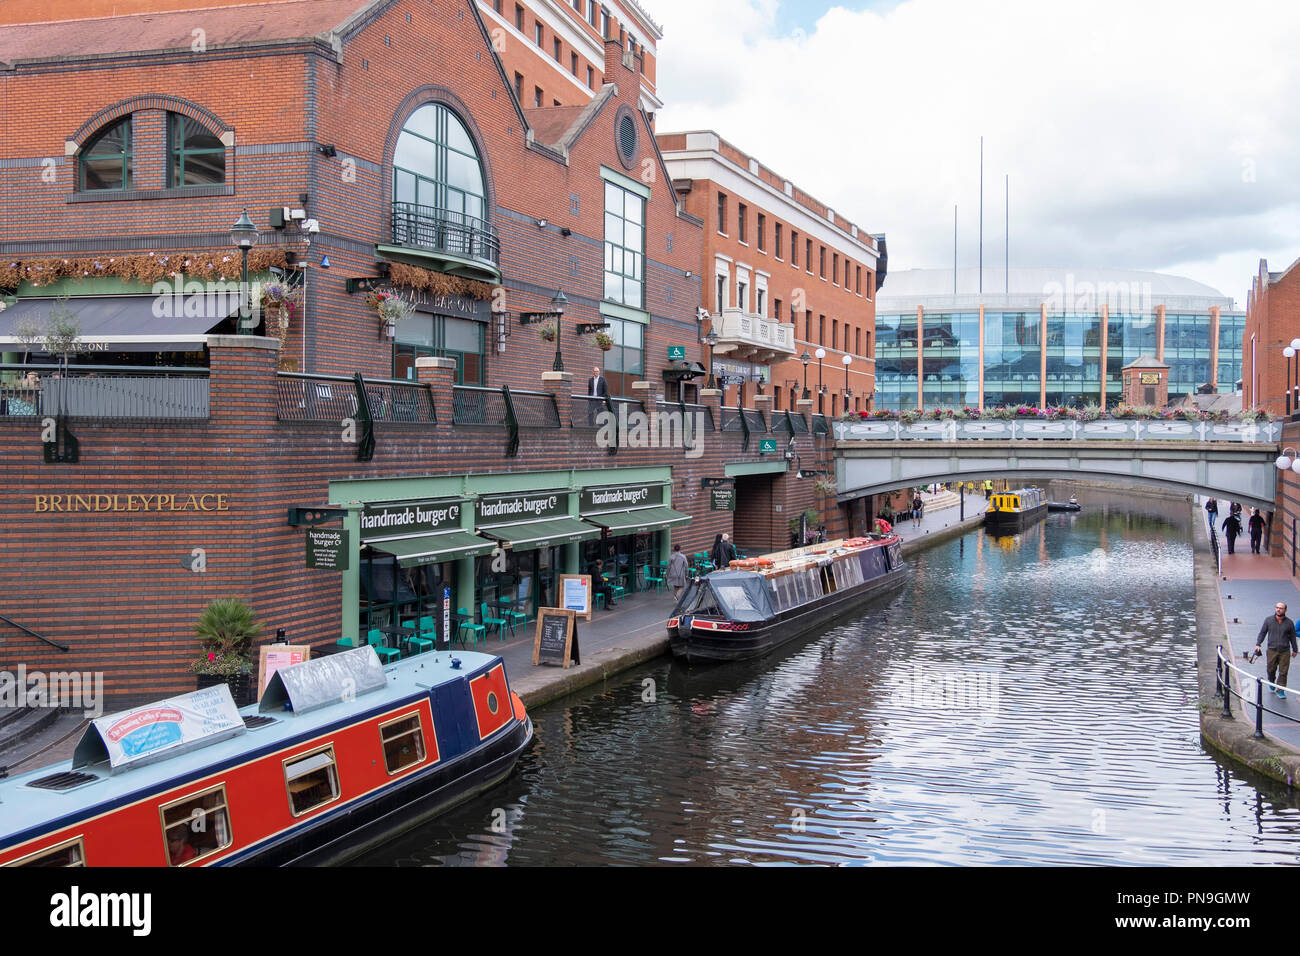 Canals at Brindleyplace, Birmingham, England Stock Photo